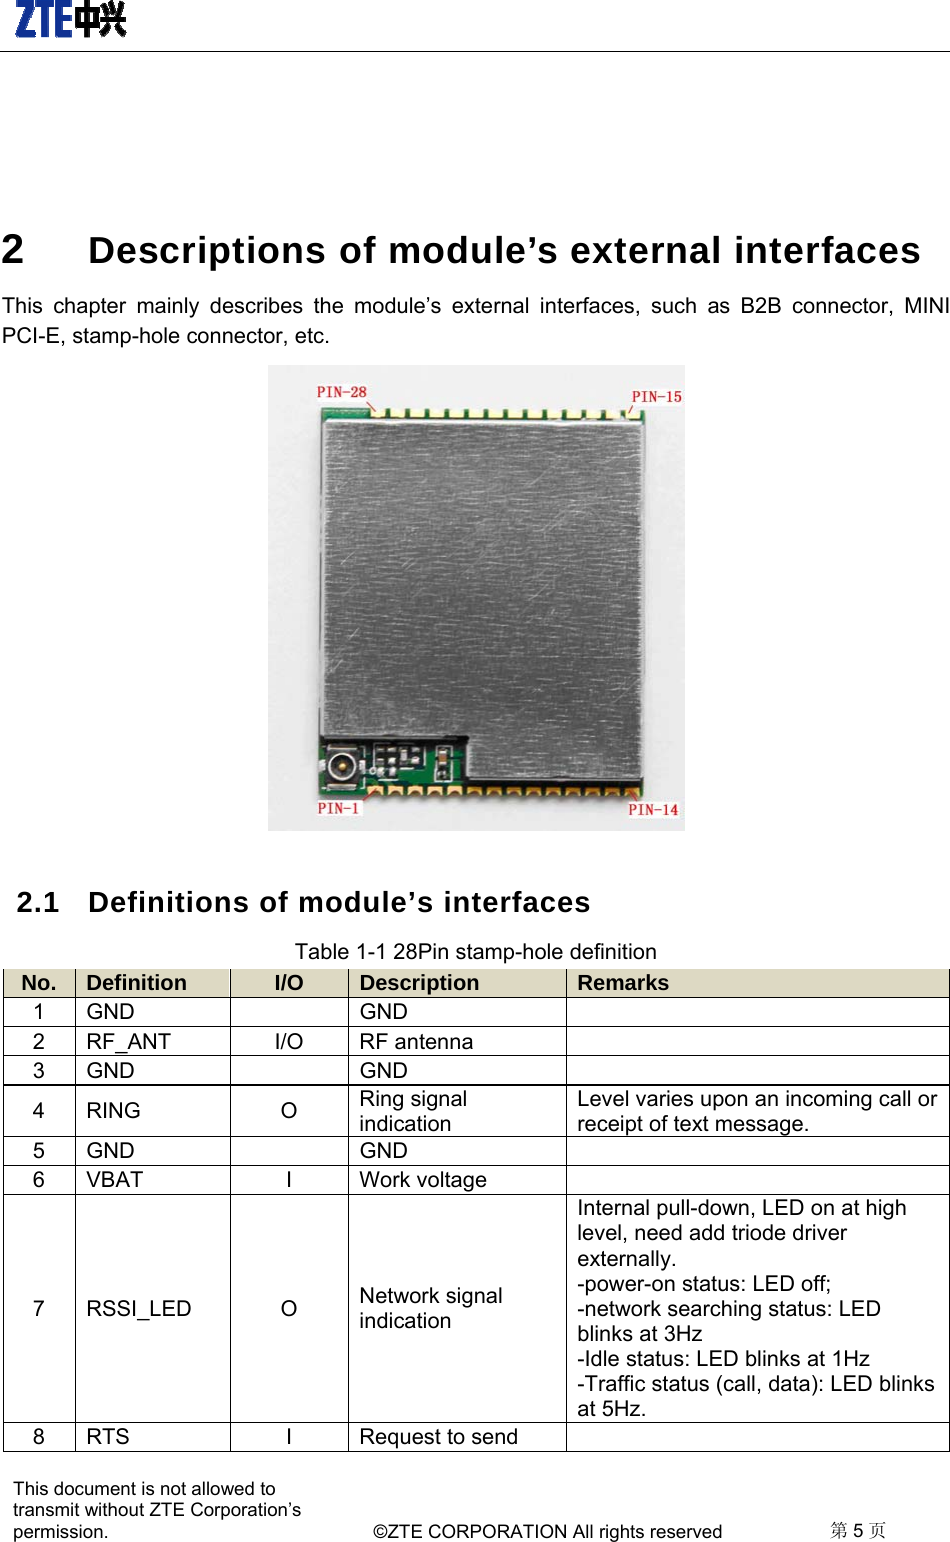   This document is not allowed to transmit without ZTE Corporation’s permission.    ©ZTE CORPORATION All rights reserved  第5页    2  Descriptions of module’s external interfaces This chapter mainly describes the module’s external interfaces, such as B2B connector, MINI PCI-E, stamp-hole connector, etc.    2.1  Definitions of module’s interfaces     Table 1-1 28Pin stamp-hole definition   No.  Definition  I/O  Description  Remarks 1 GND    GND   2 RF_ANT  I/O  RF antenna    3 GND    GND   4 RING  O  Ring signal indication Level varies upon an incoming call or receipt of text message. 5 GND    GND   6 VBAT  I  Work voltage   7 RSSI_LED  O  Network signal indication  Internal pull-down, LED on at high level, need add triode driver externally.   -power-on status: LED off; -network searching status: LED blinks at 3Hz -Idle status: LED blinks at 1Hz -Traffic status (call, data): LED blinks at 5Hz.   8 RTS  I  Request to send    